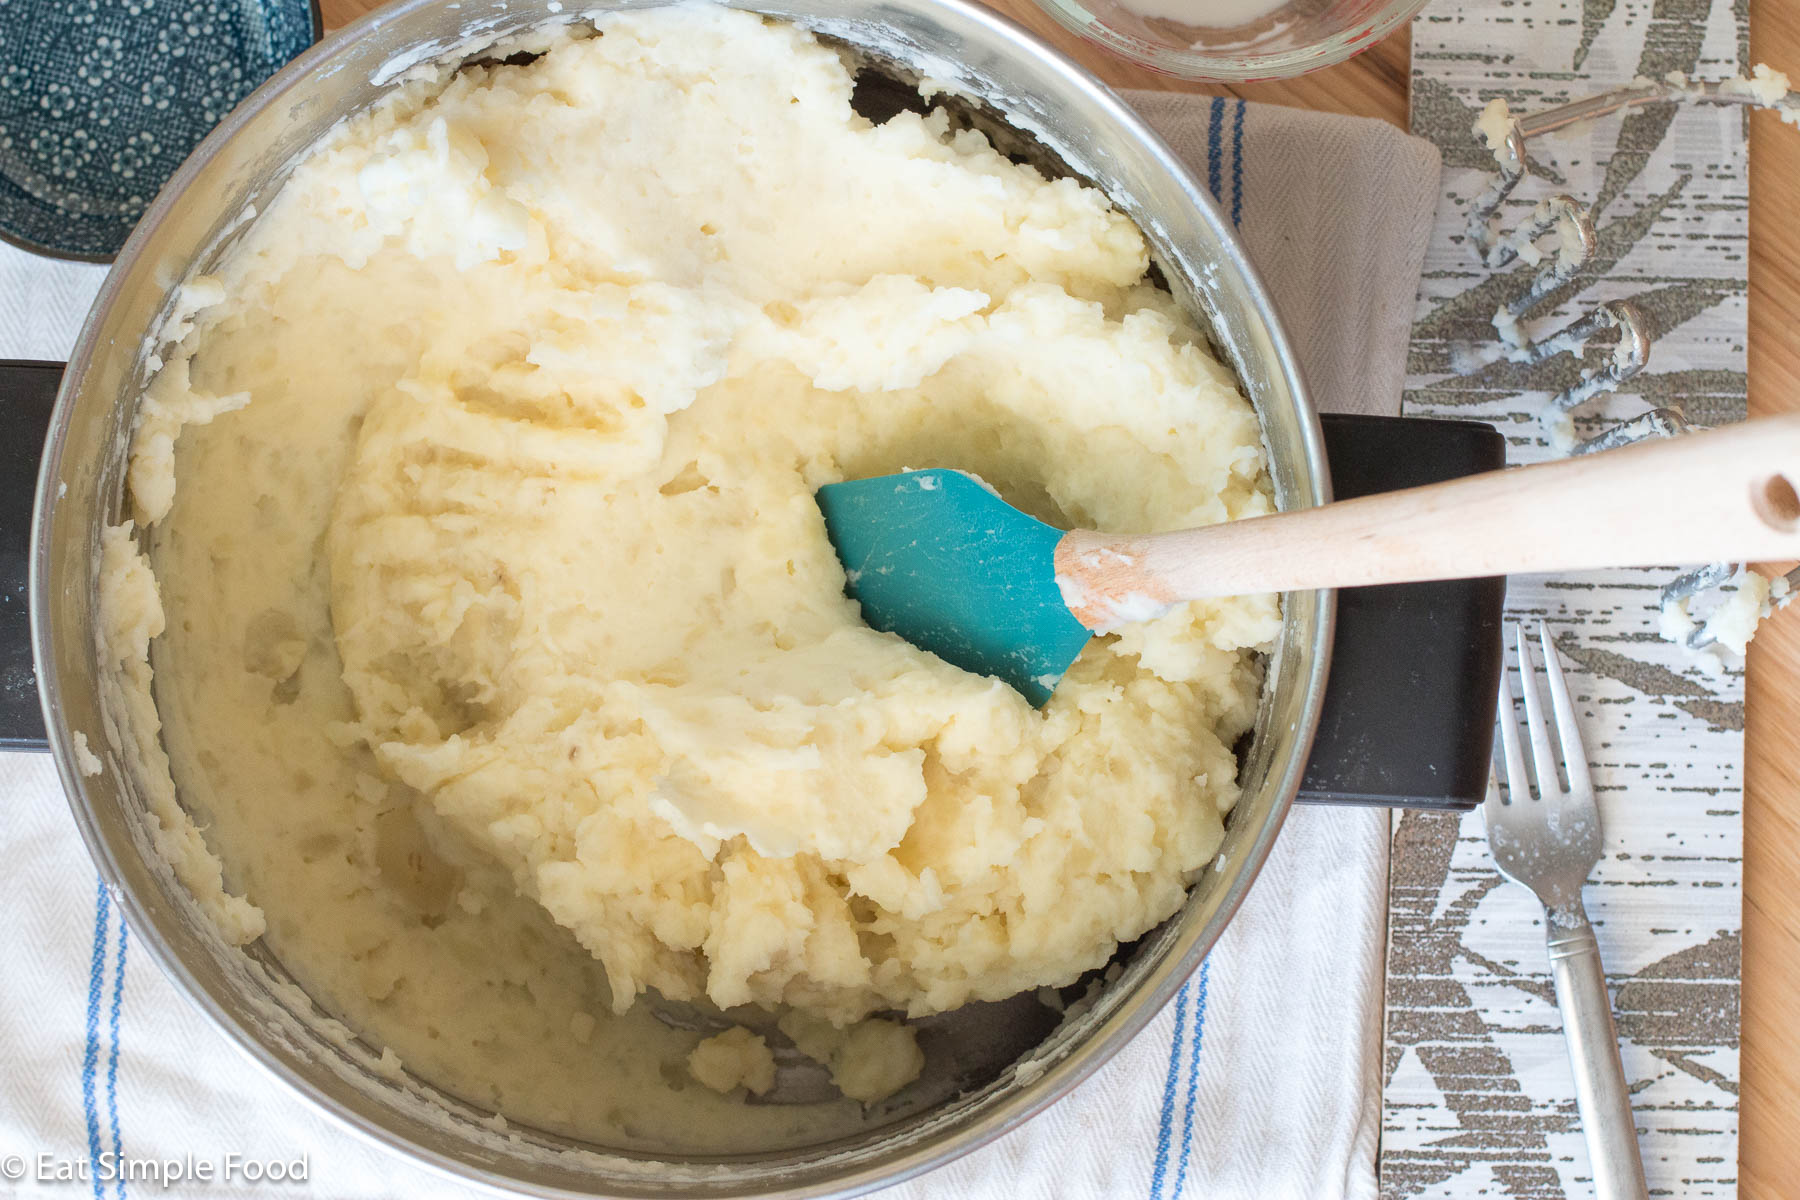 Top down view of a pot filled with mashed potatoes and a blue spatula with a wood handle hanging out.